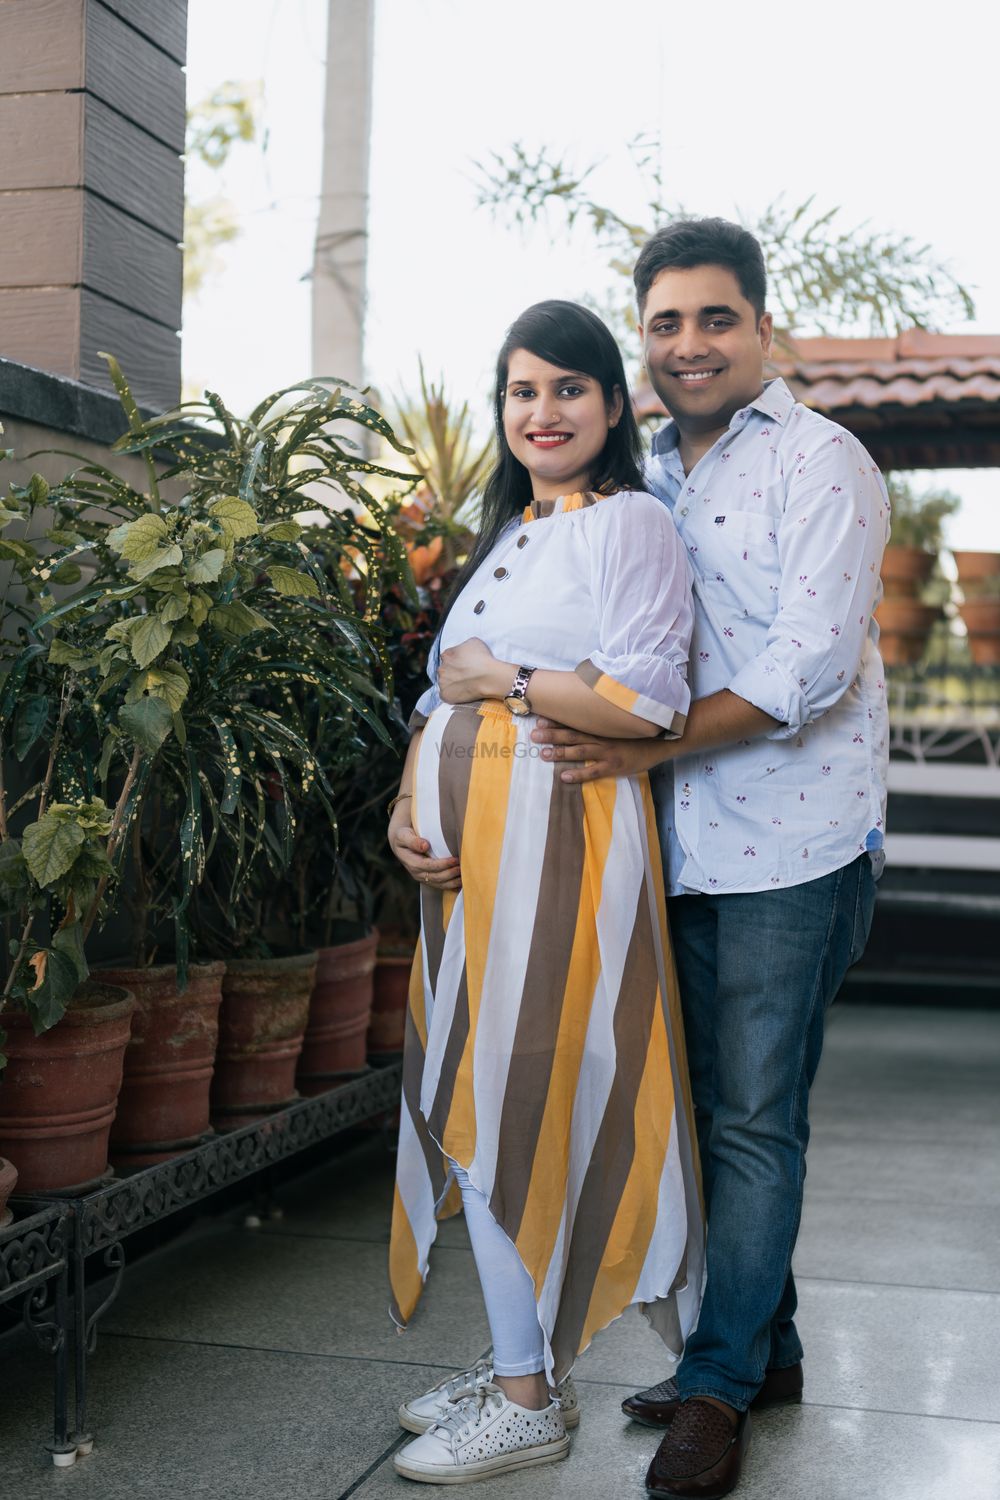 Photo From Swati's Maternity Shoot: A Celebration of Life - By RN Creation